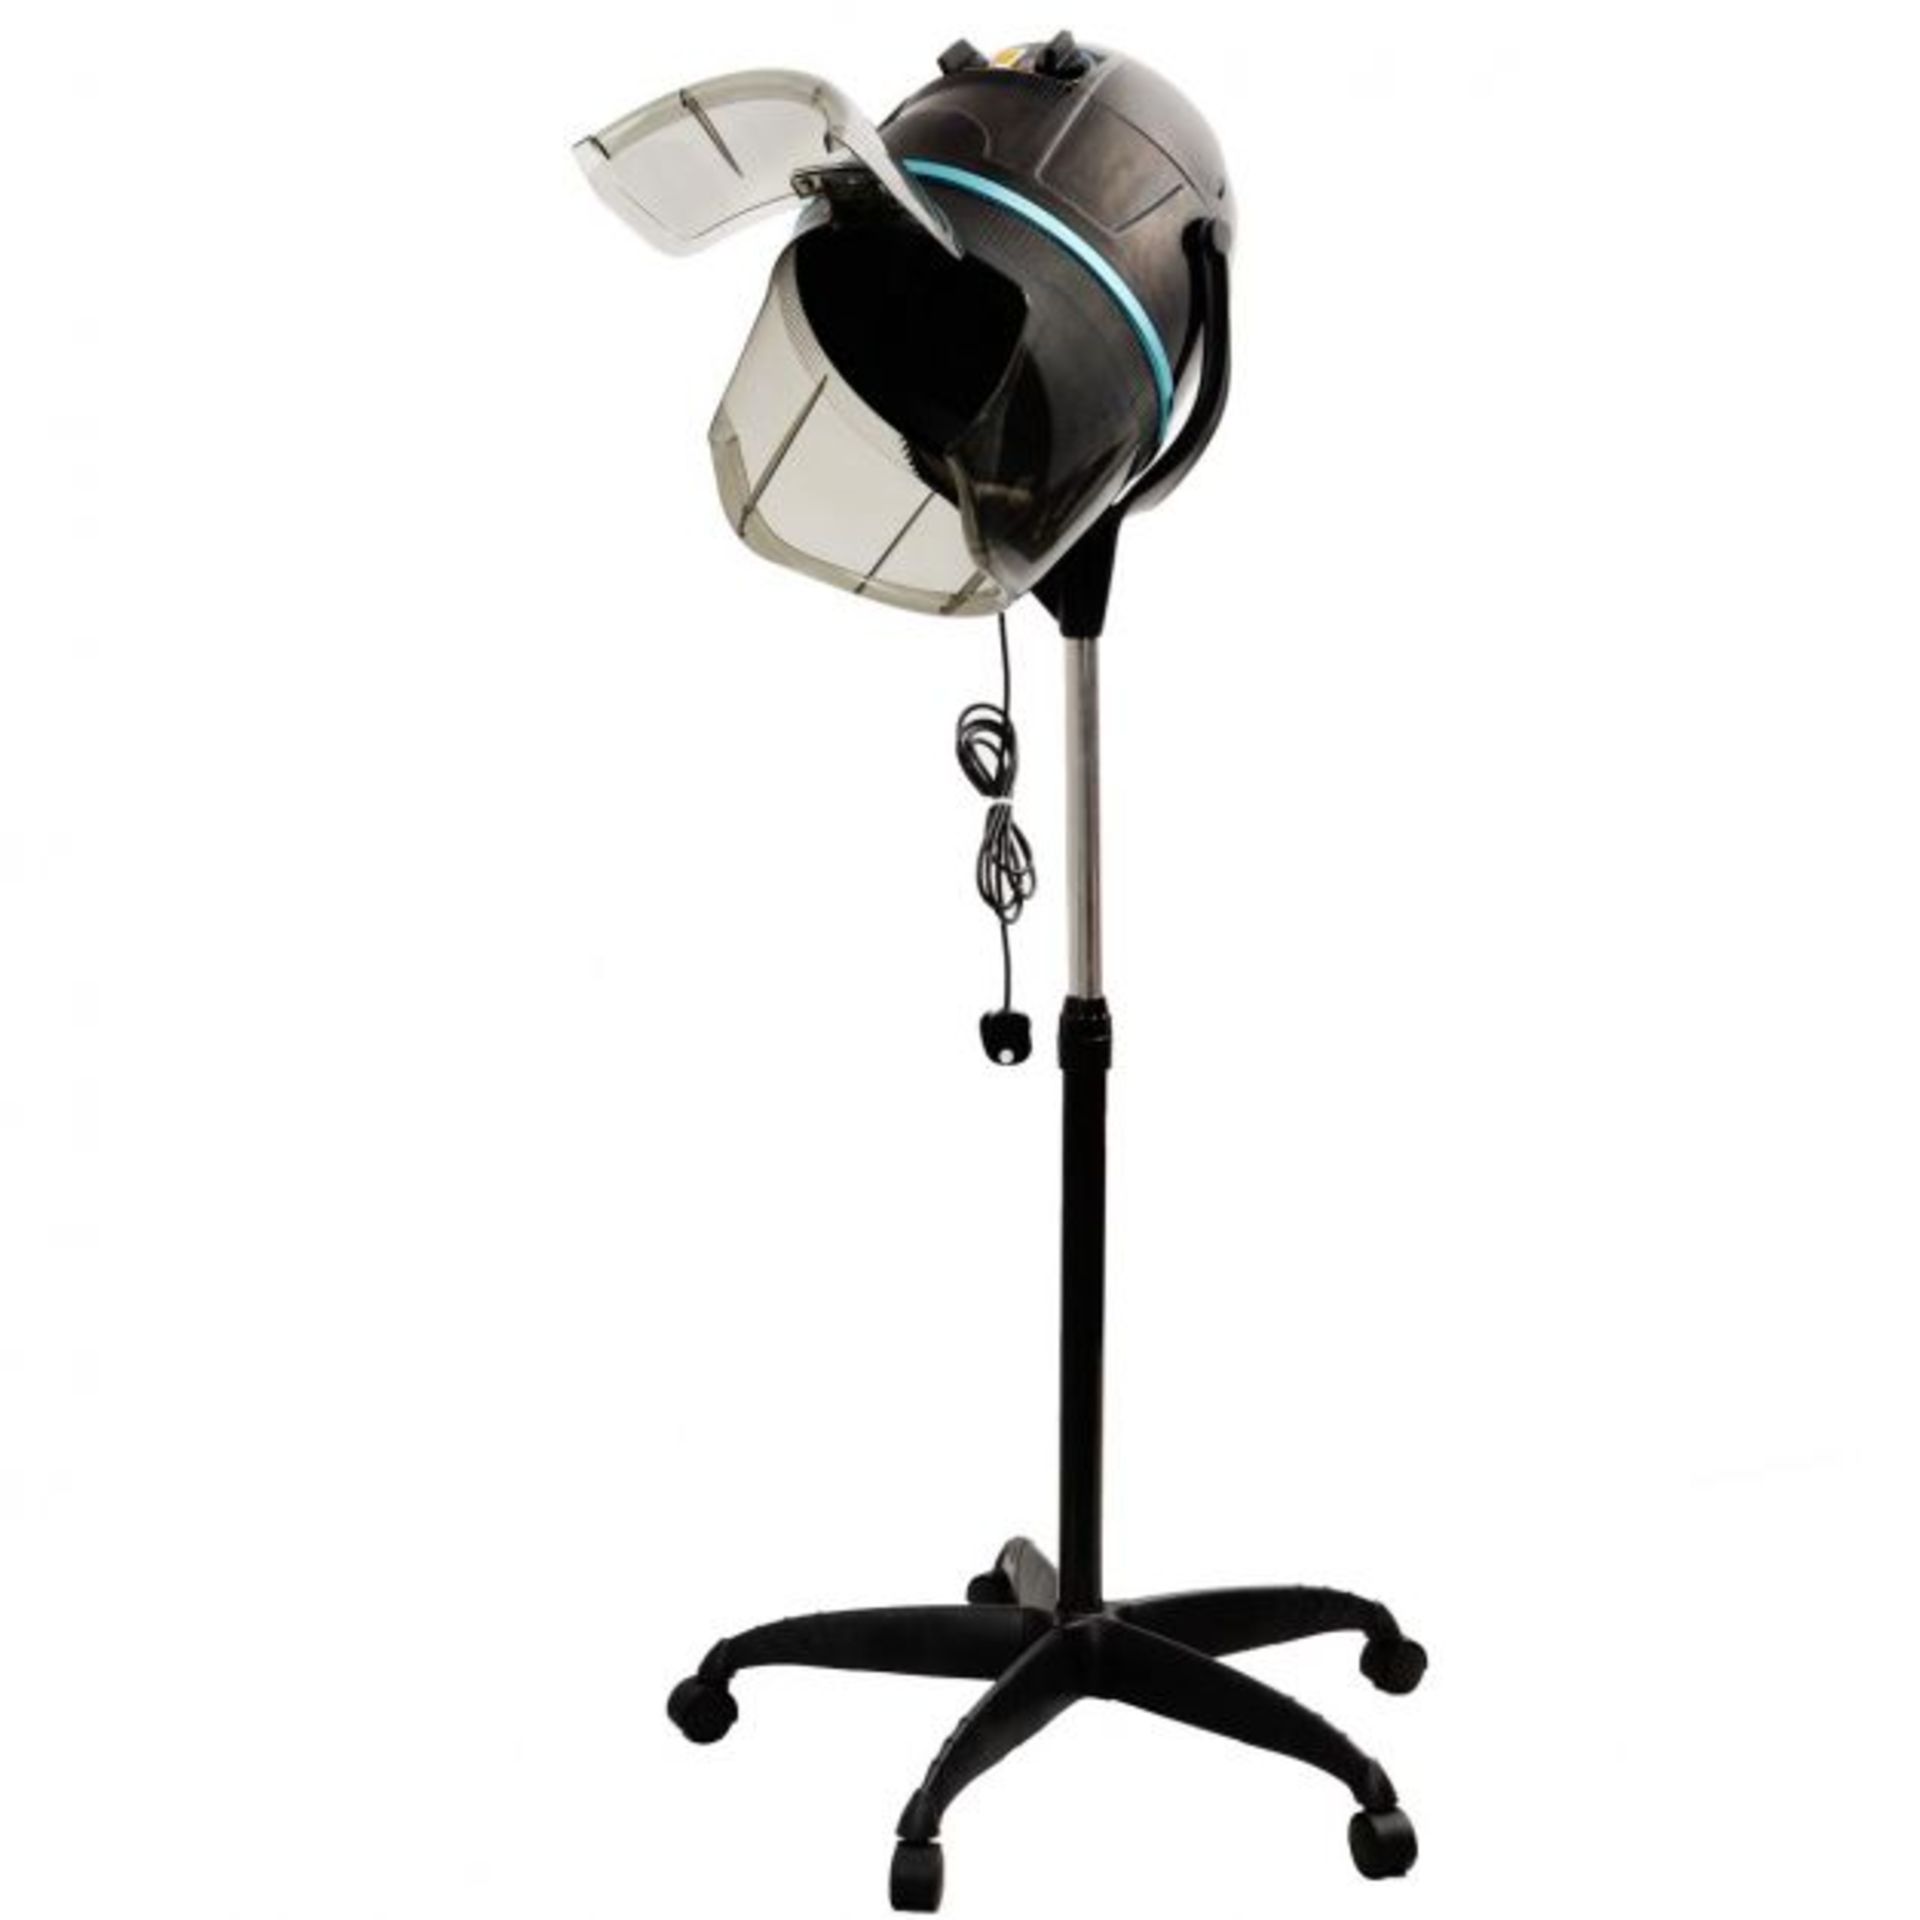 Portable Salon Hood Hairdryer with Stand. - SR23. Suitable in drying, colouring, perming and